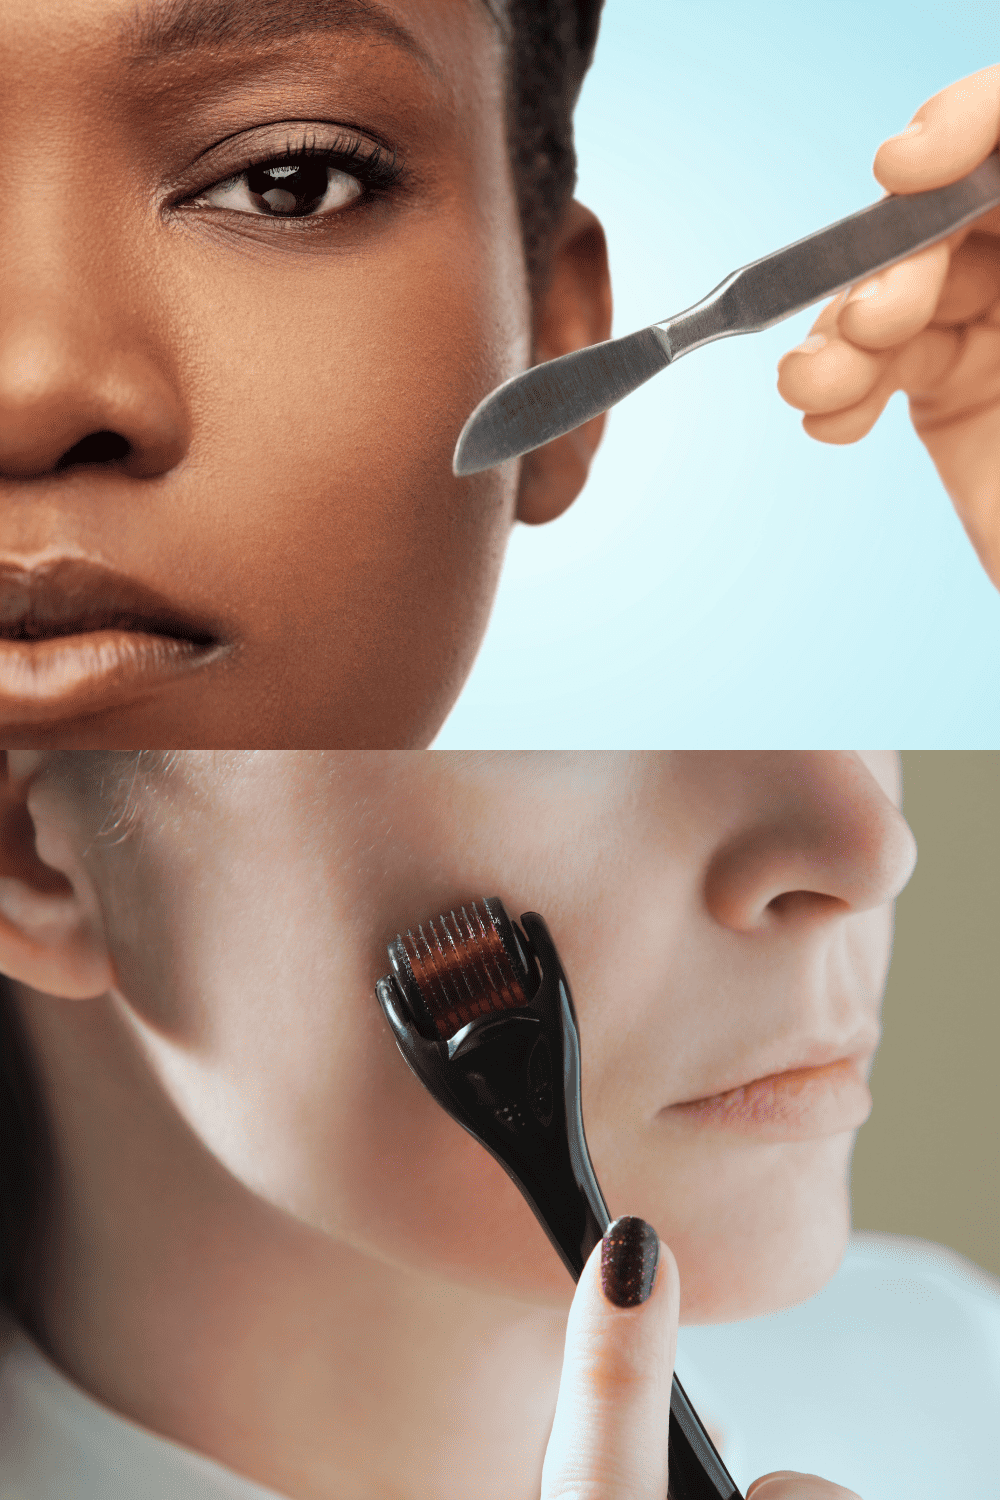 dermaplaning and microneedling